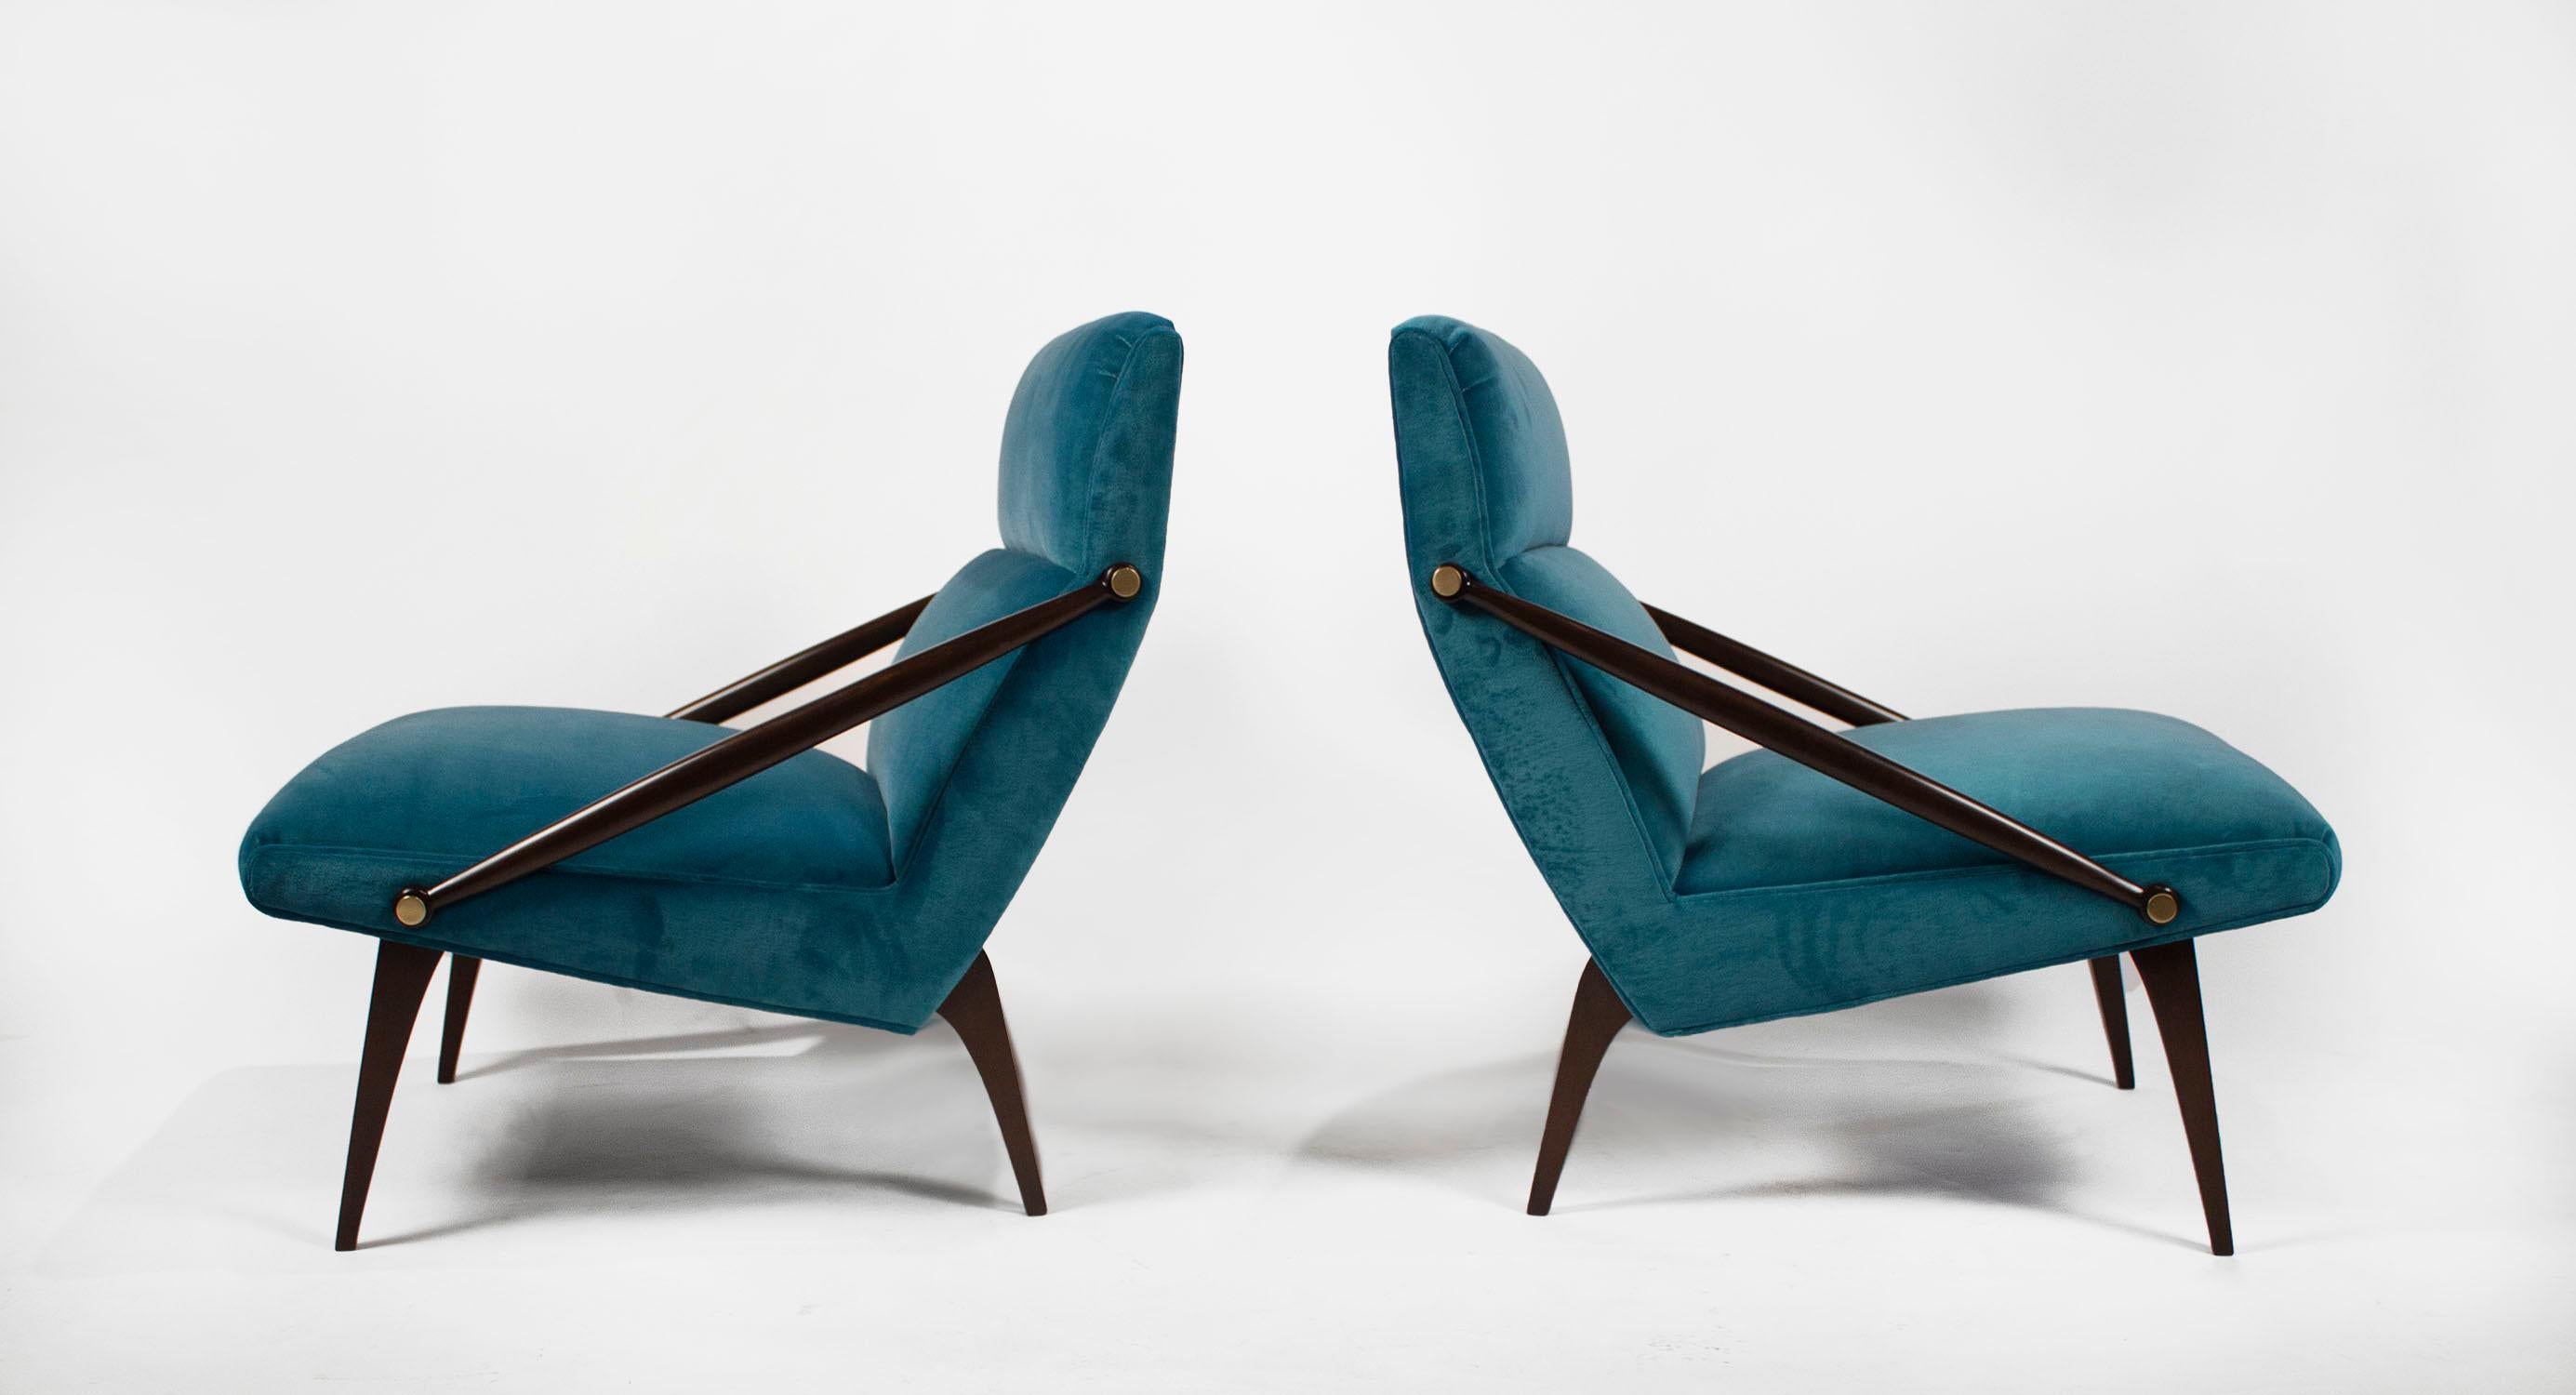 Rare pair of lounge chairs designed by Italian architect Gio Ponti and produced for M. Singer & Sons circa 1950.
 
Exquisitely restored to the highest possible standard.